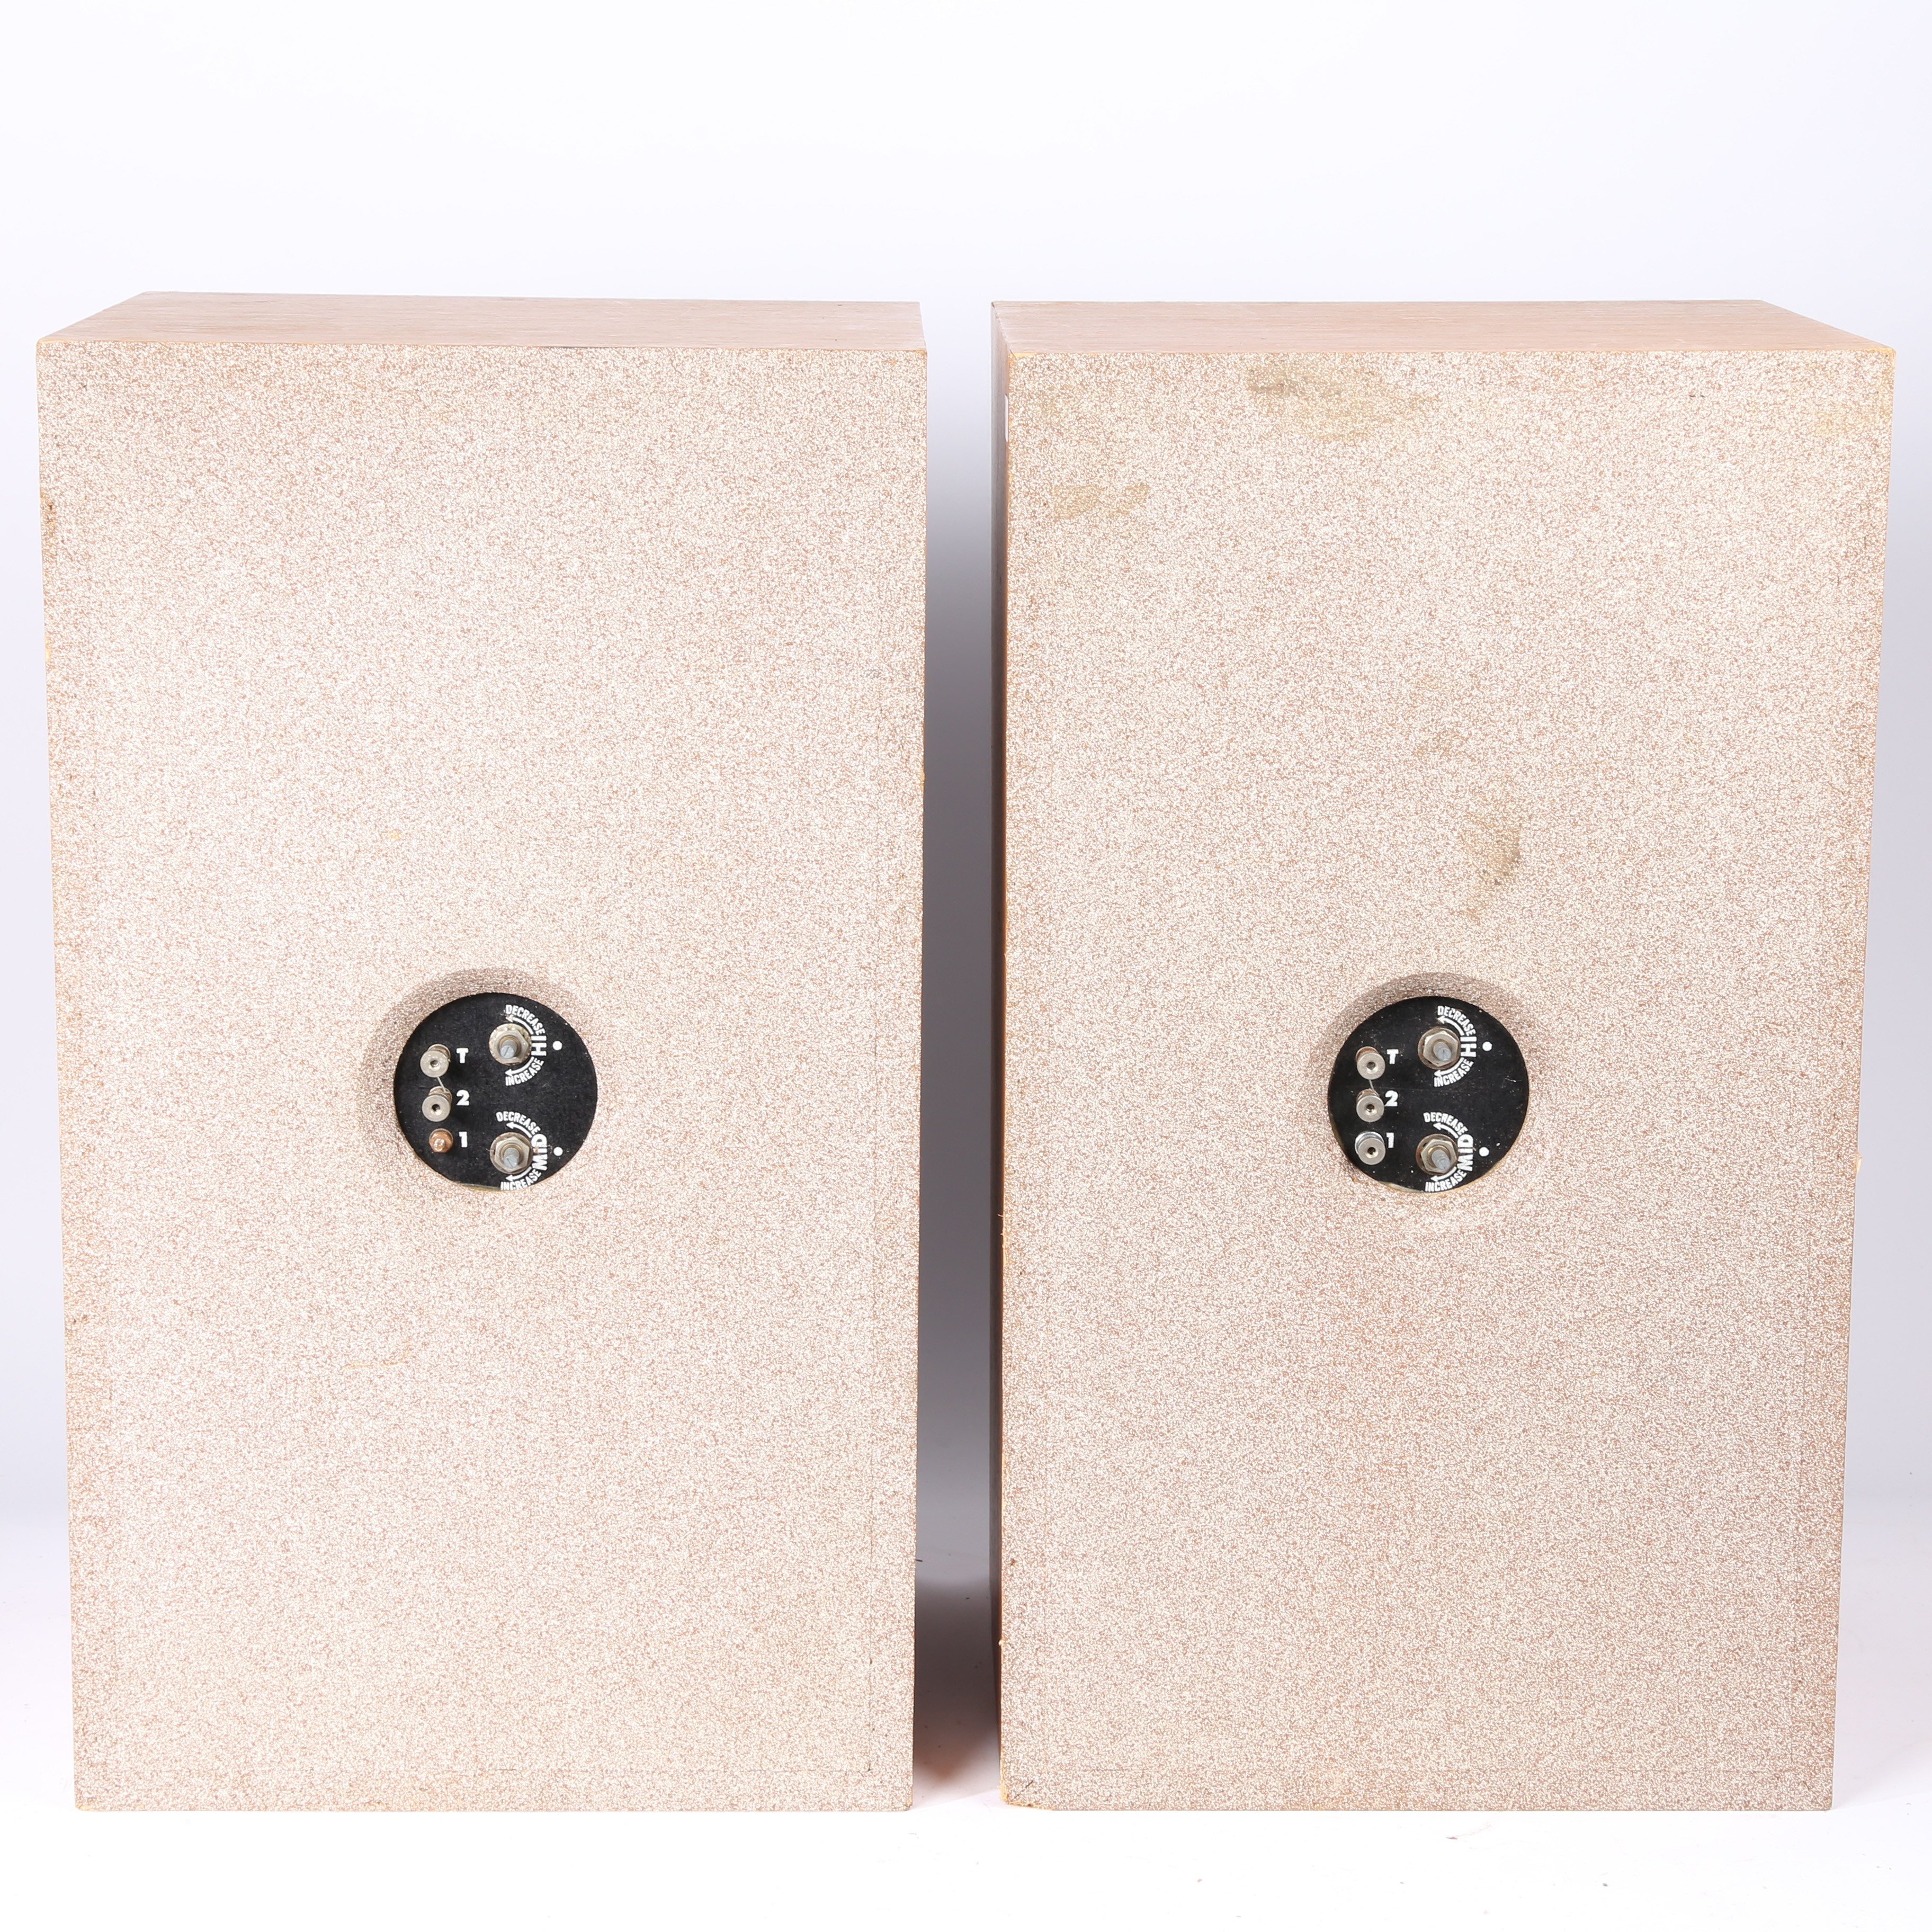 A PAIR OF ACCOUSTIC RESEARCH AR-2AX SPEAKERS. - Image 3 of 4